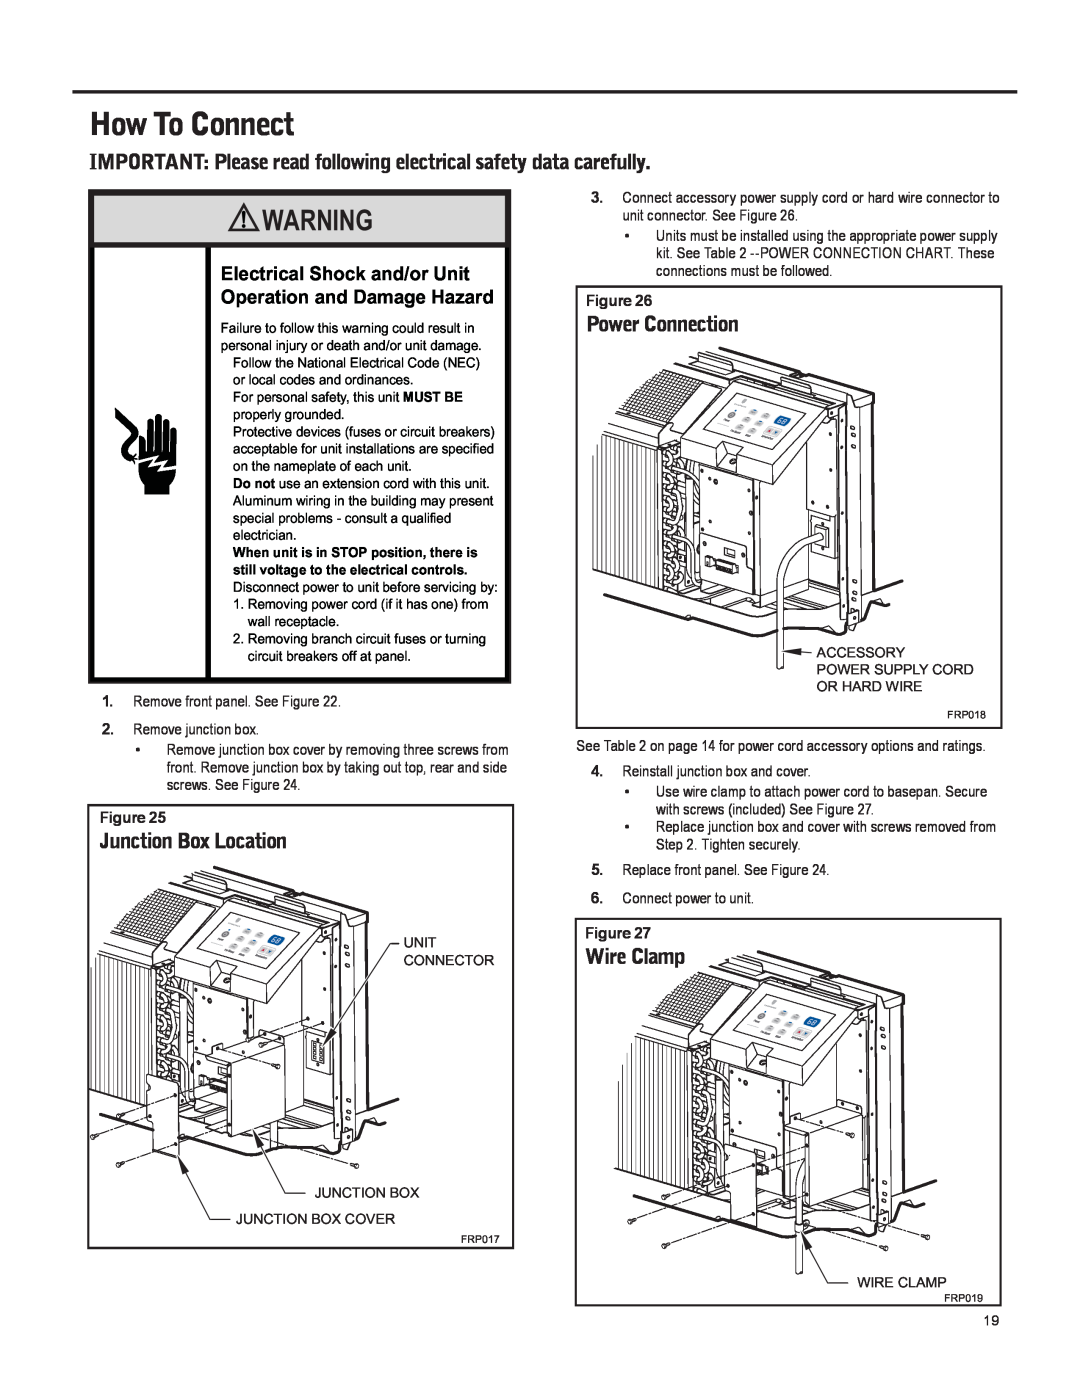 Friedrich 920-087-09 How To Connect, Power Connection, Electrical Shock and/or Unit, Operation and Damage Hazard 